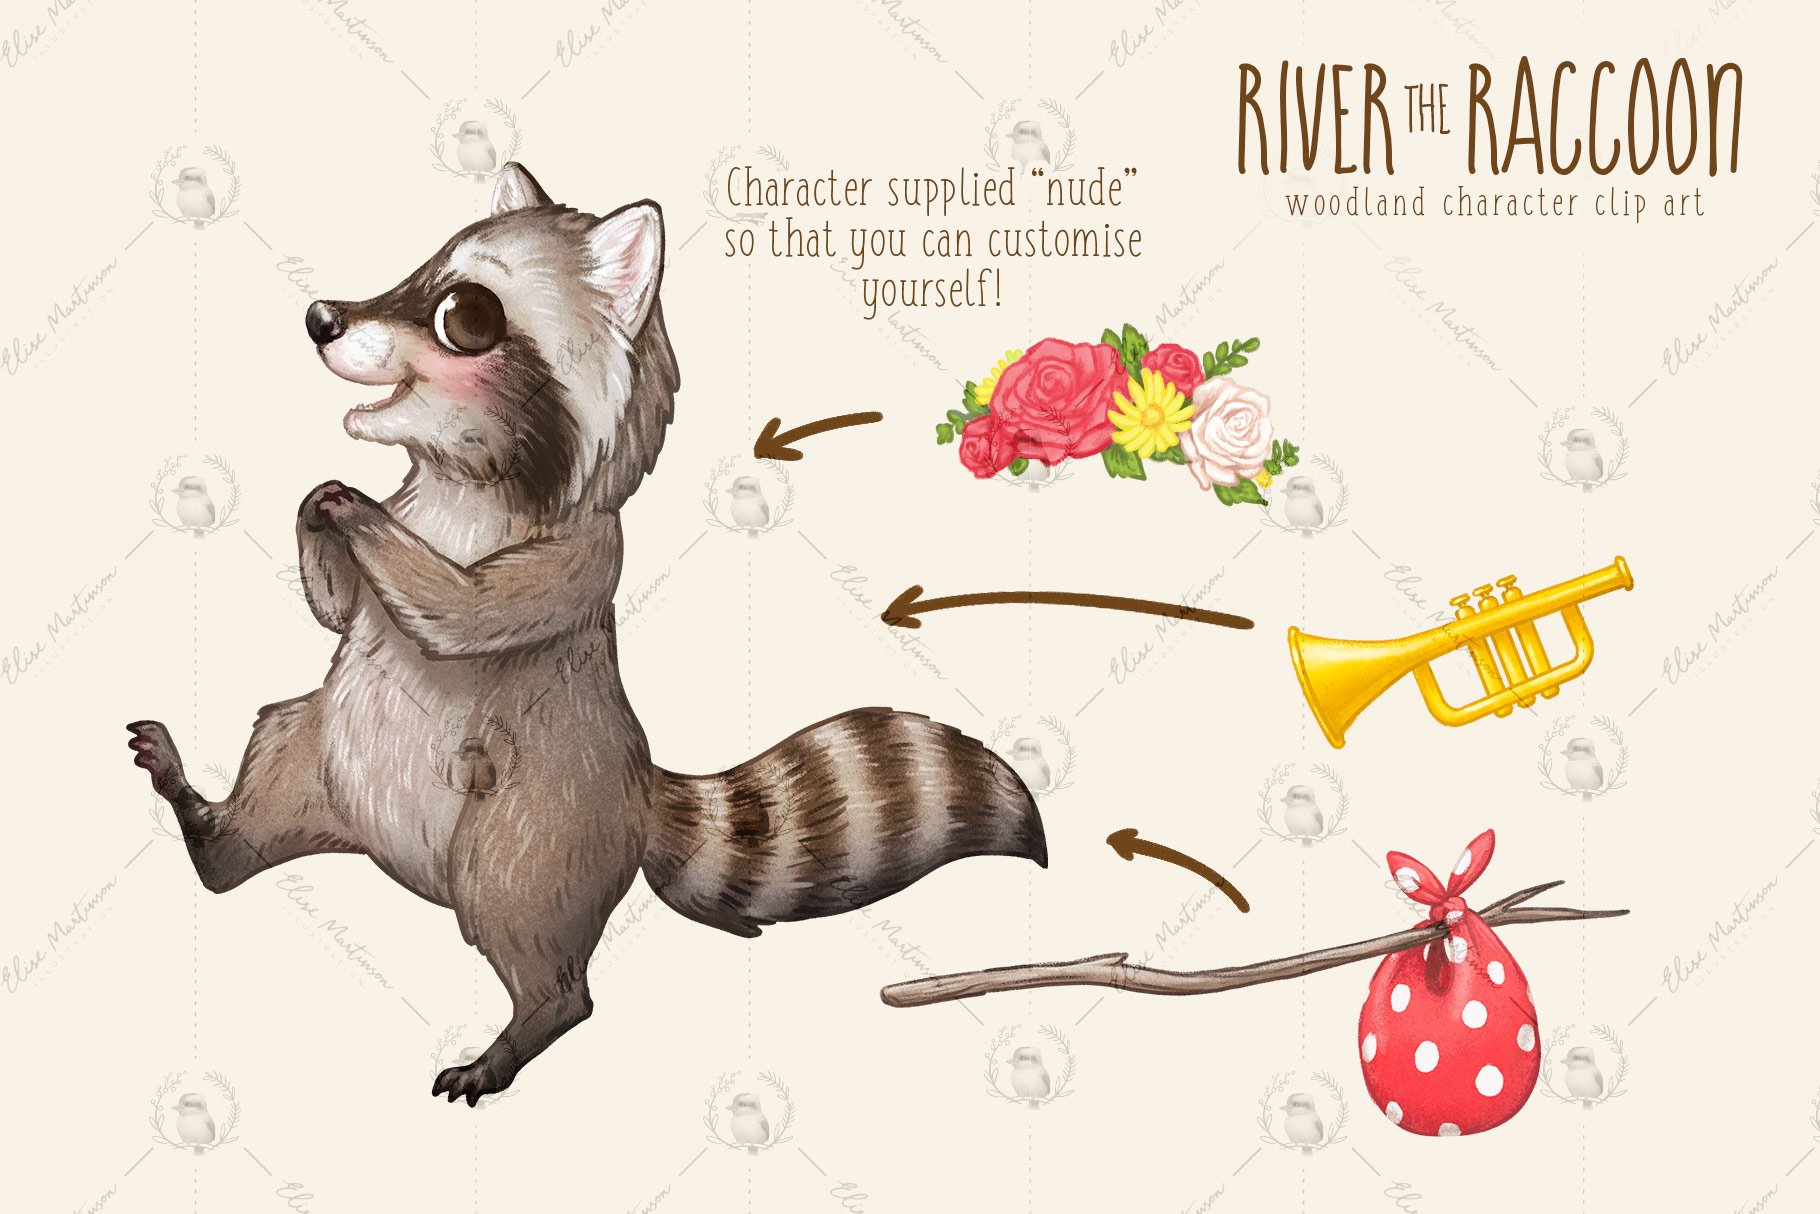 cm woodland characters river raccoon pg4 179